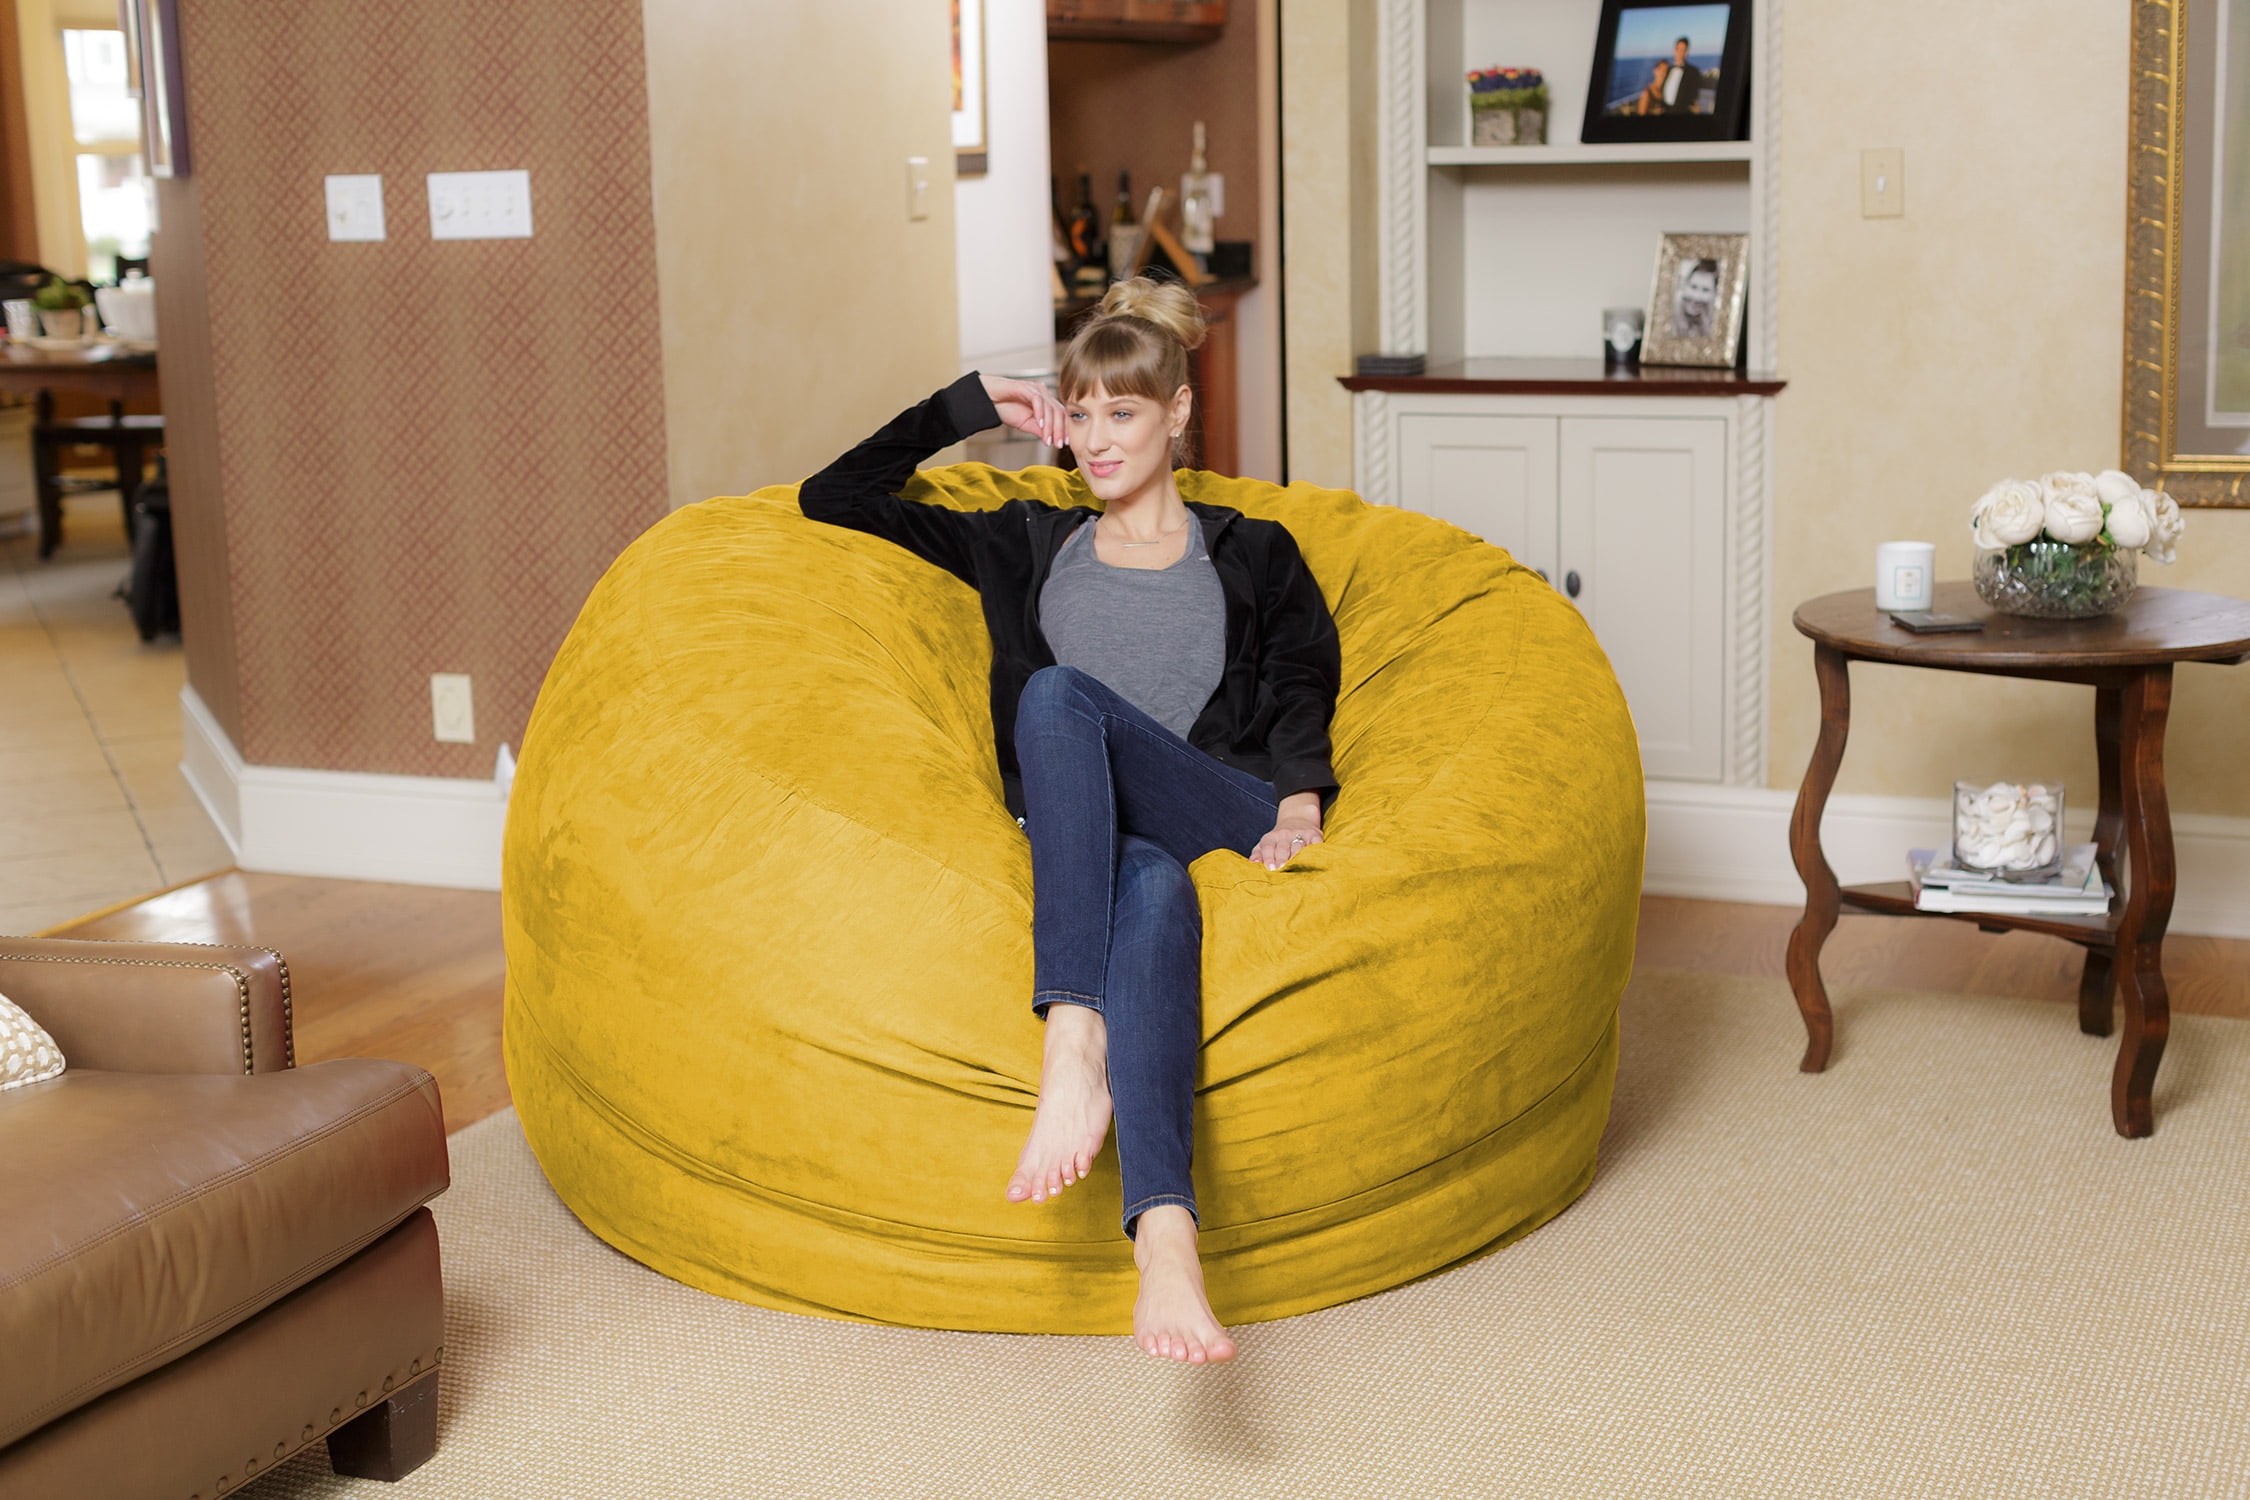 6' Large Bean Bag Lounger With Memory Foam Filling And Washable